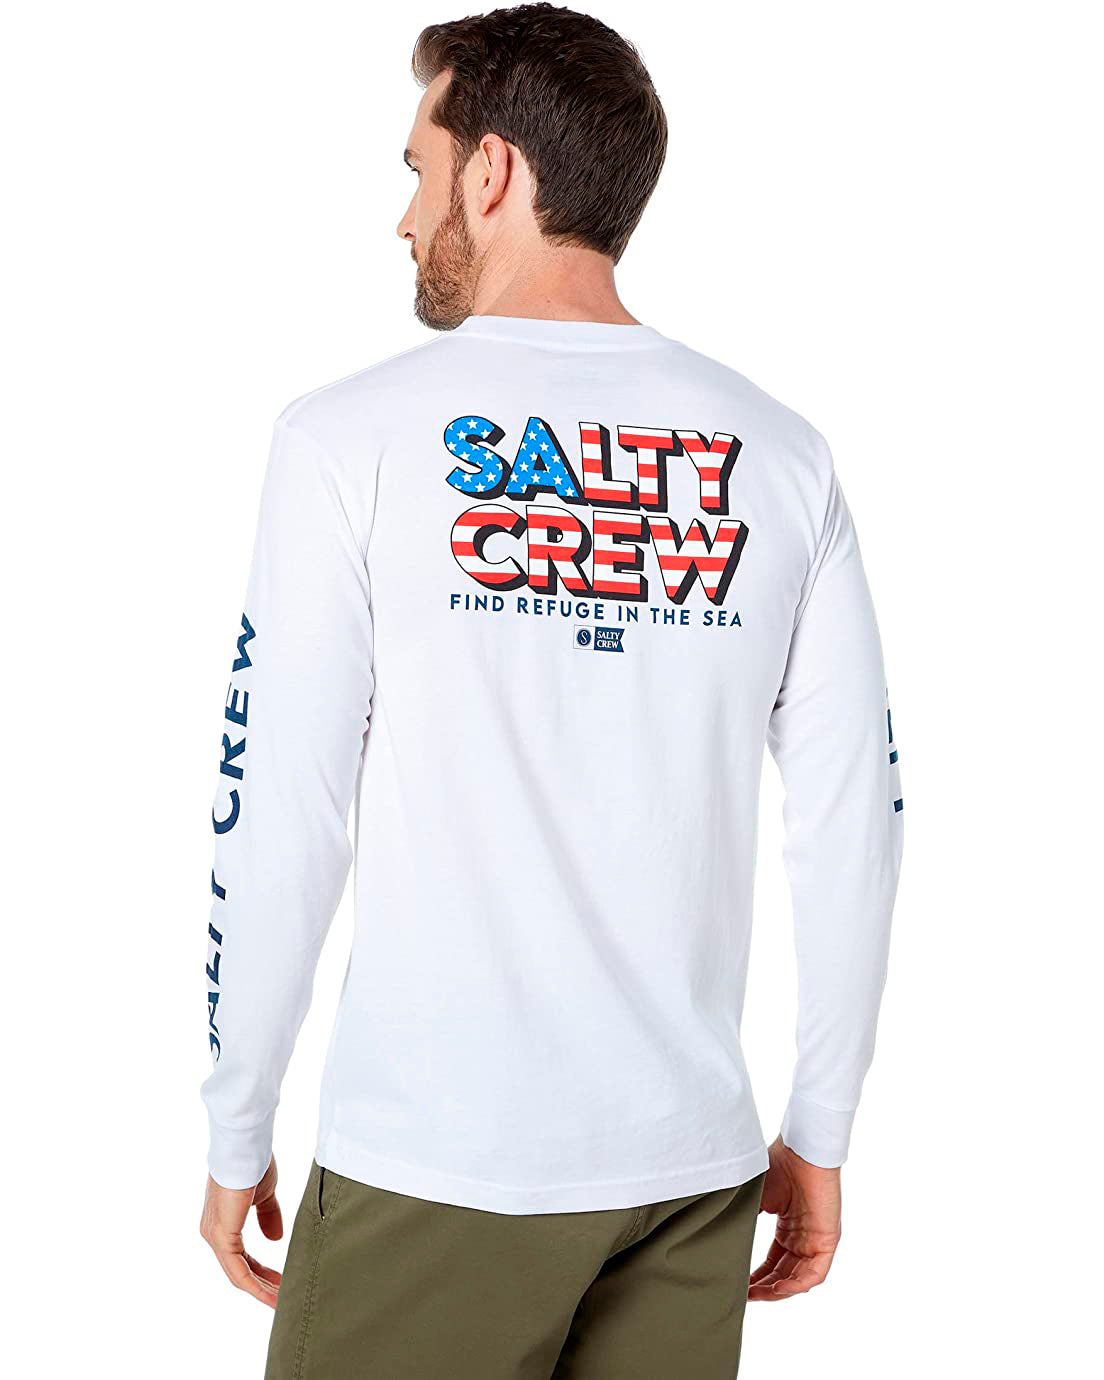 Salty Crew Stars and Stripes LS Tee White L